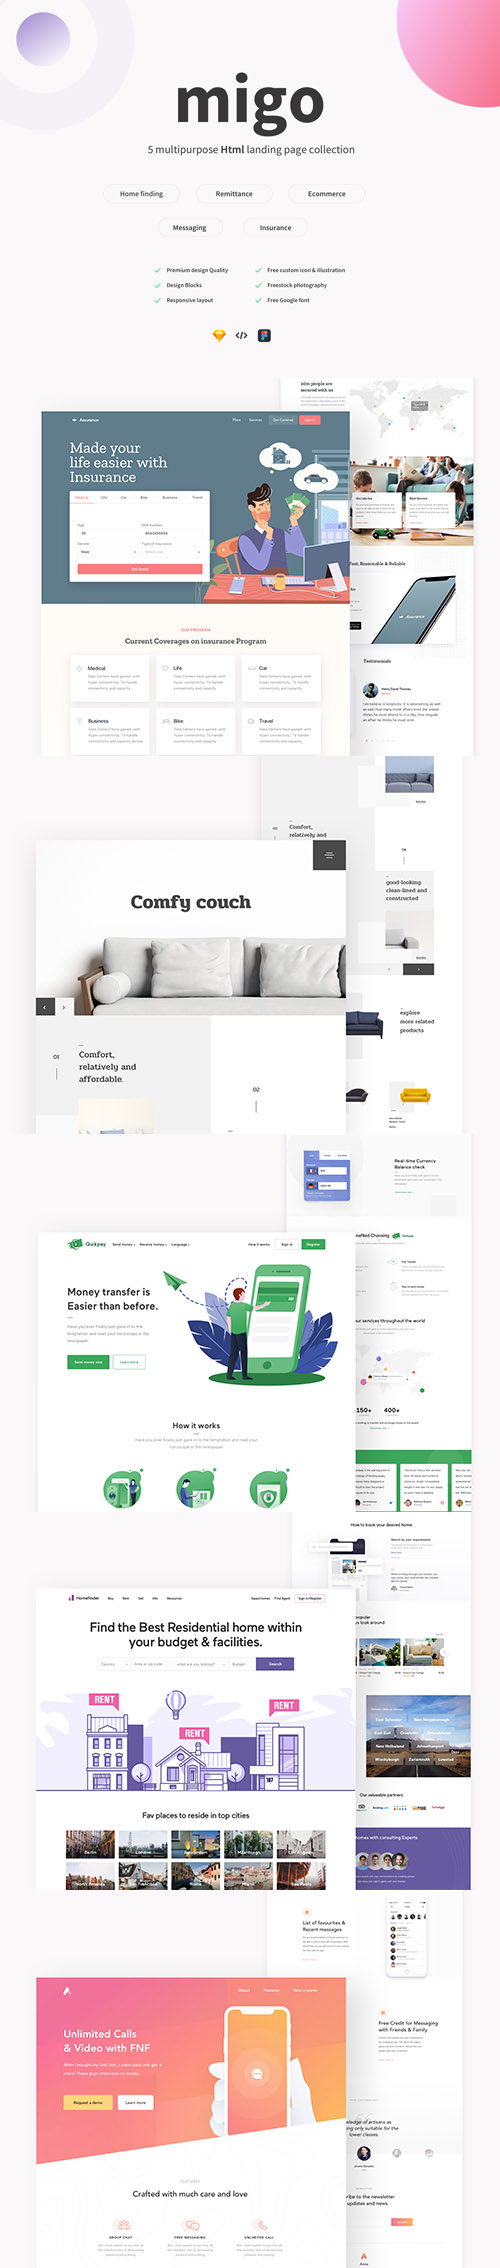 Migo app landing page pack-1 - 5 different Landing page design collection